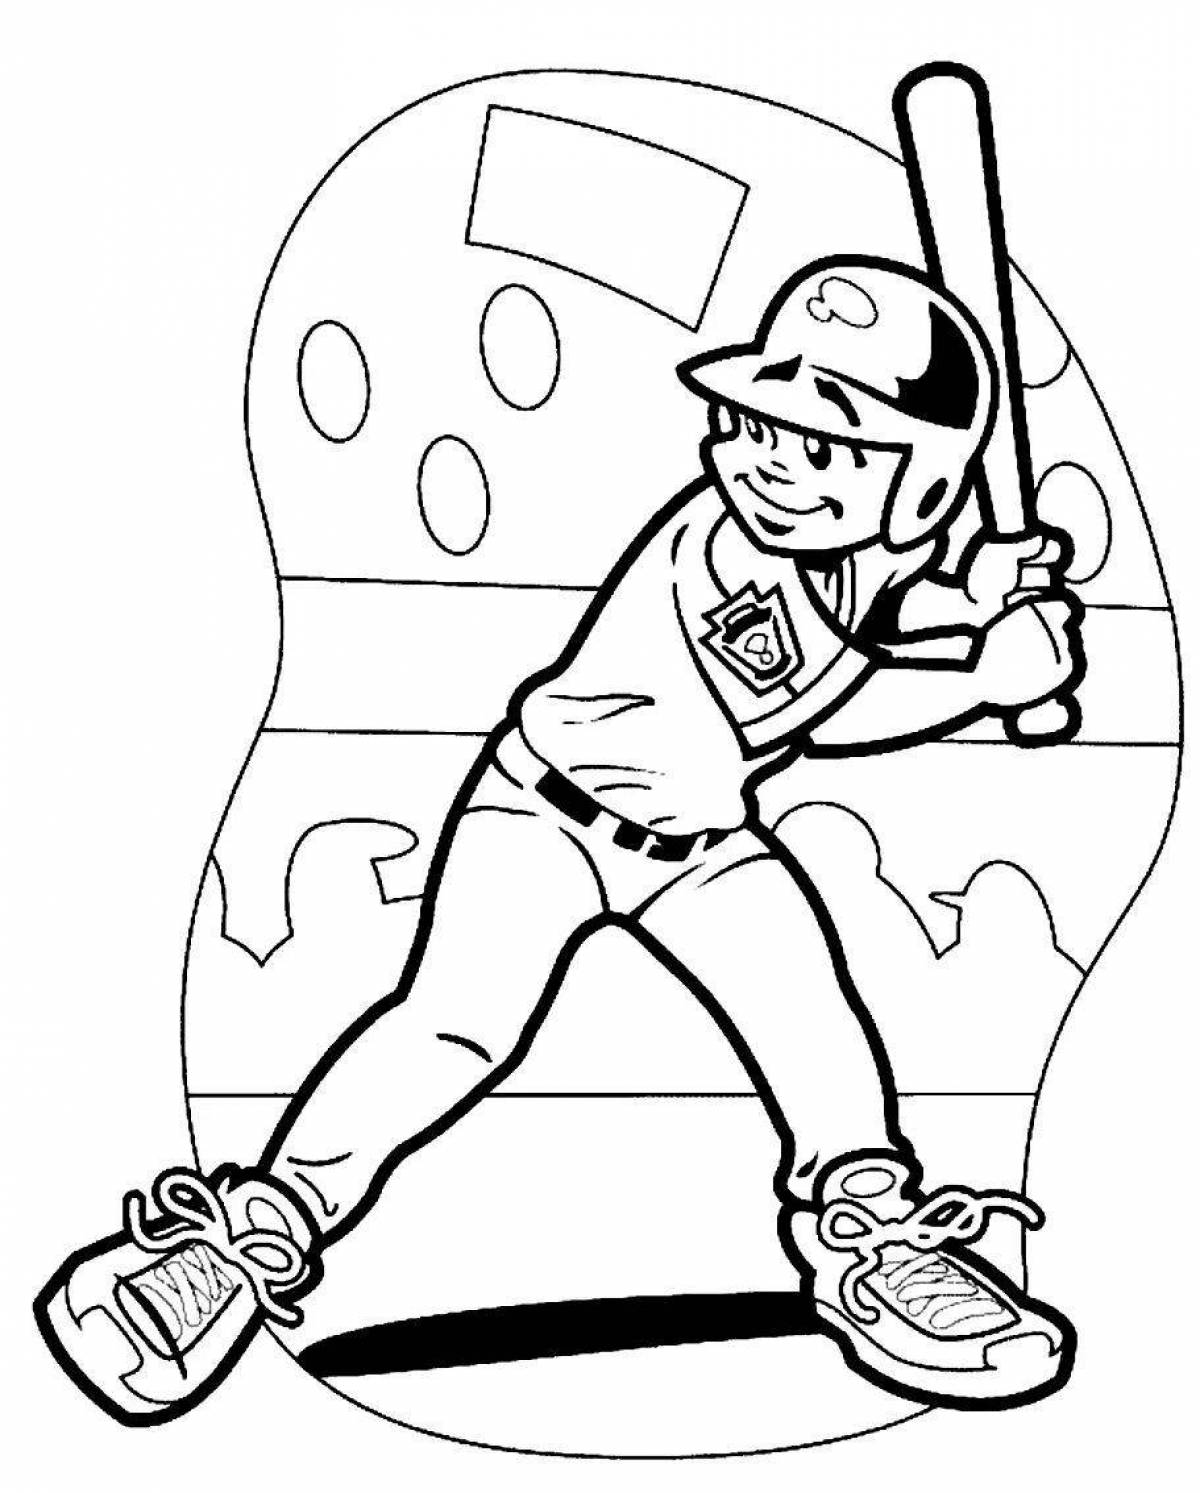 Amazing sports coloring pages for preschoolers